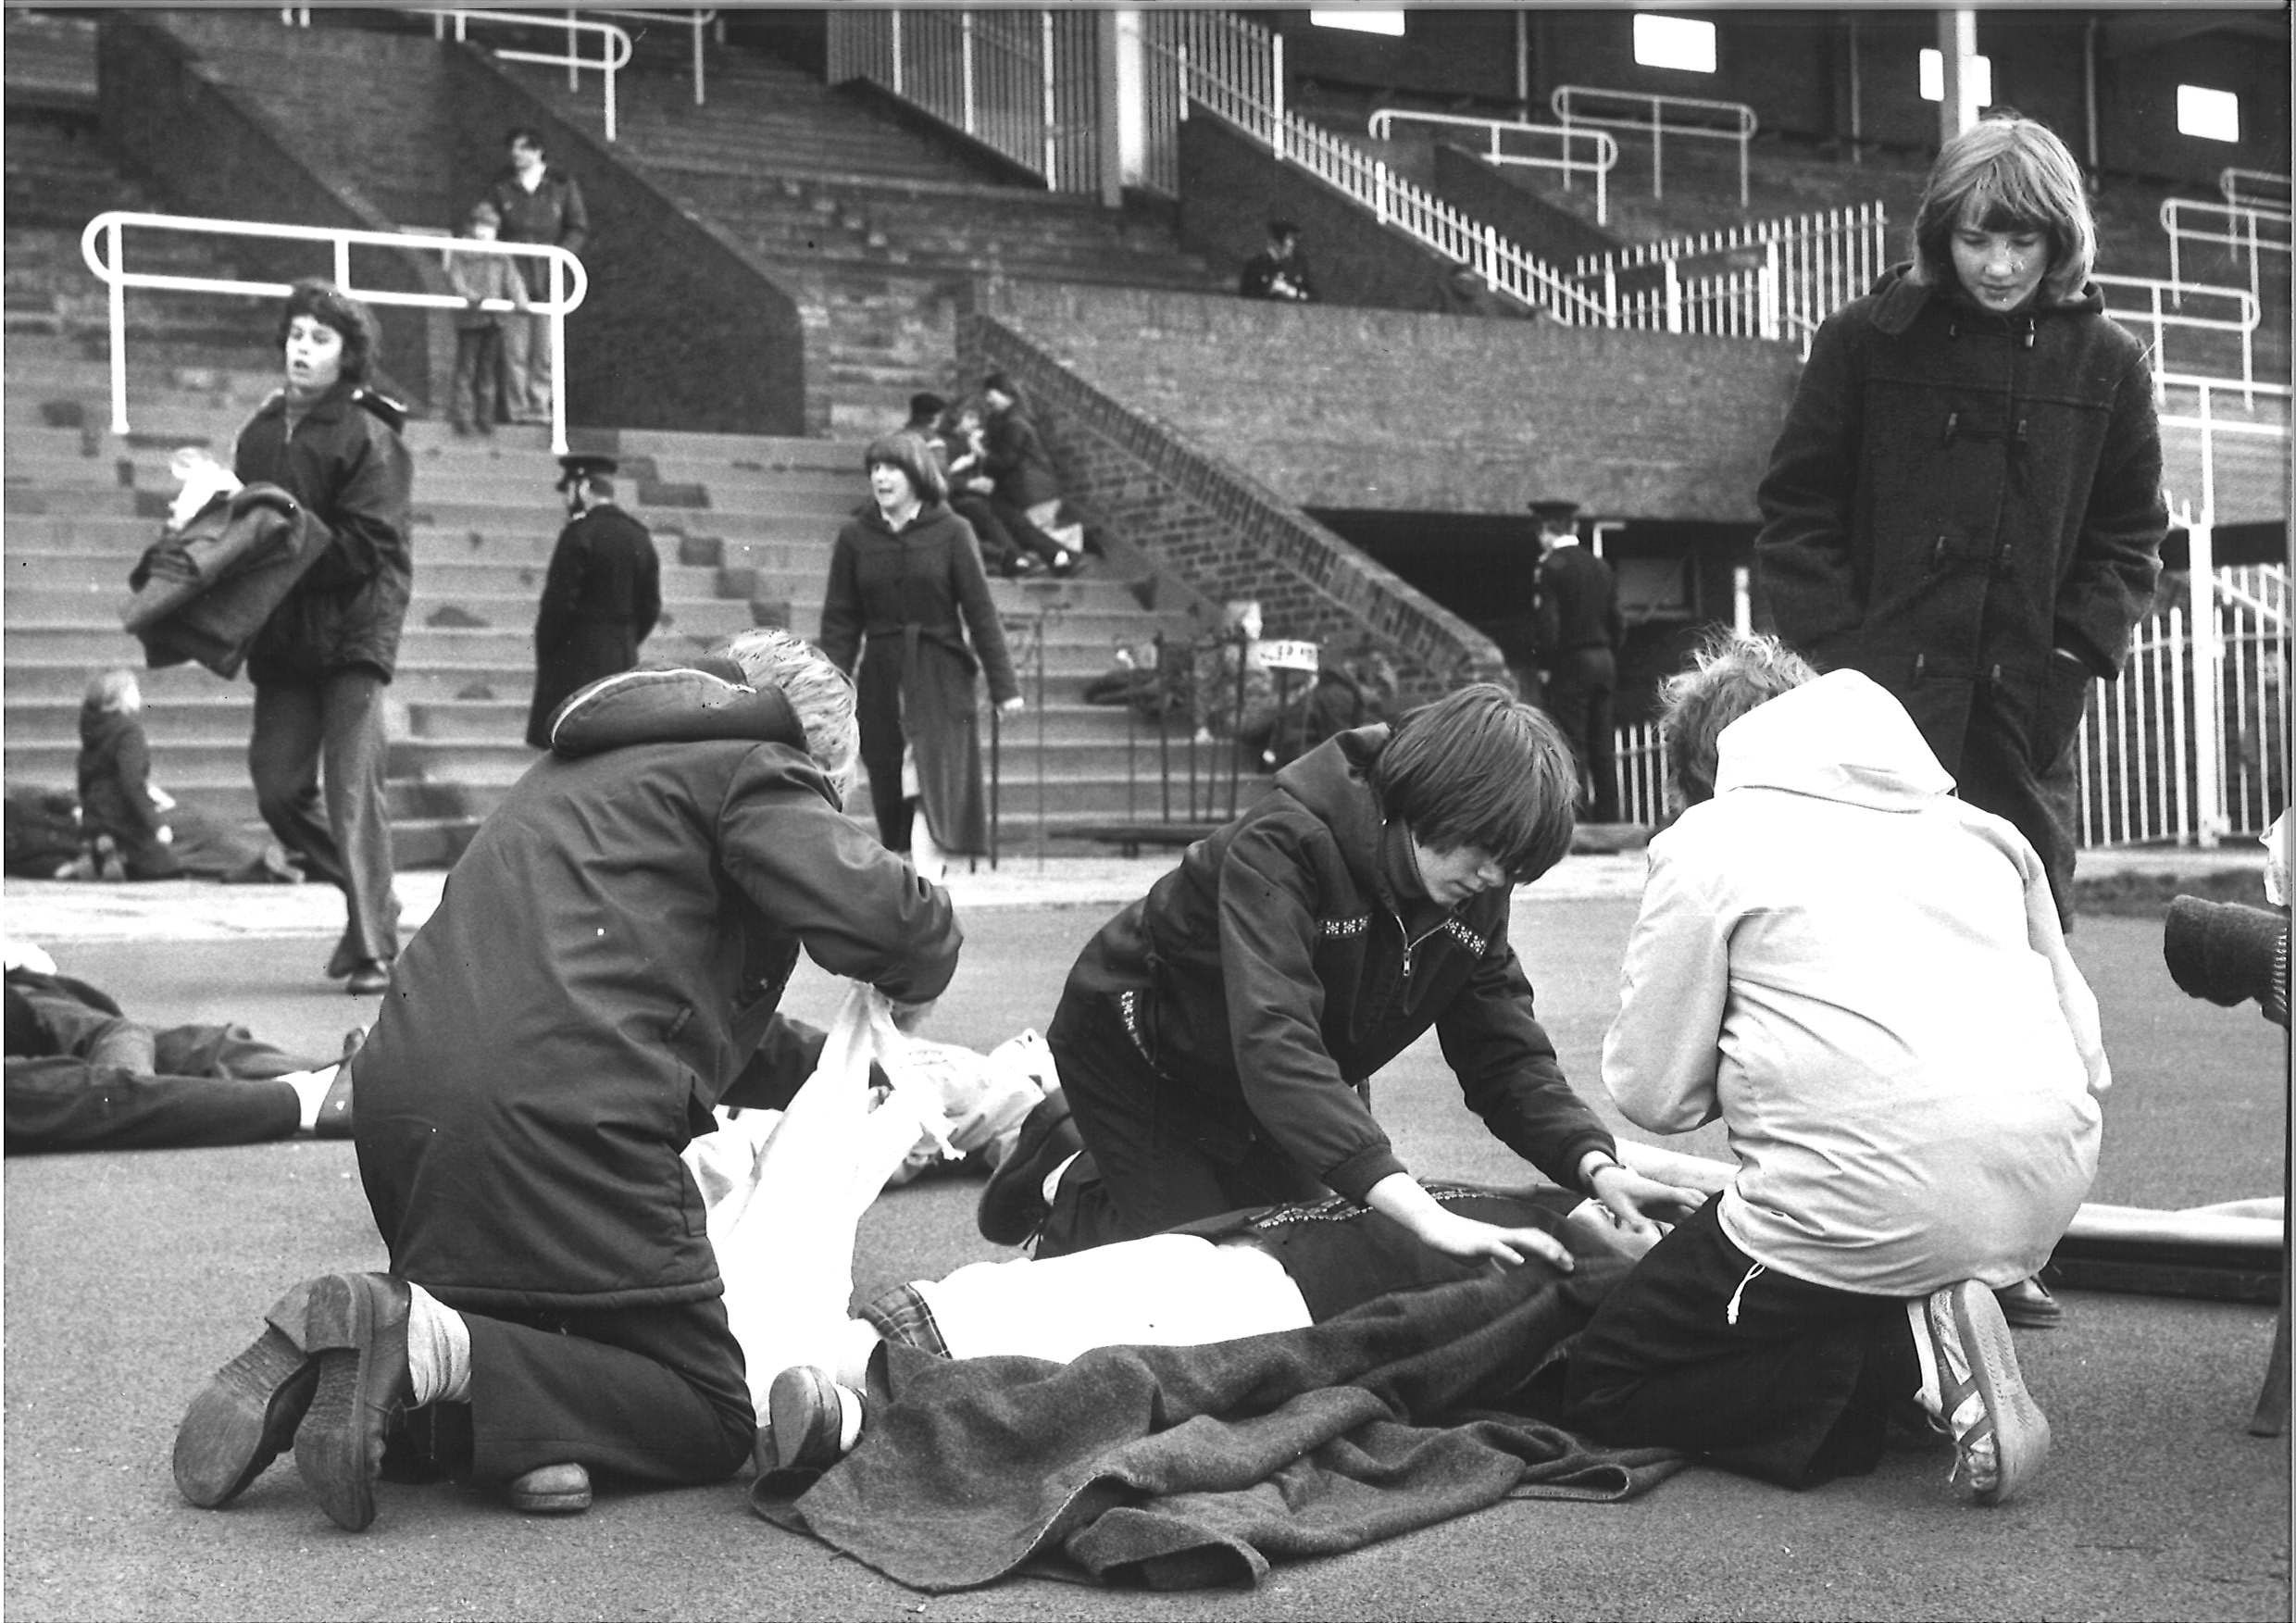 Black and white photograph with three boys in the foreground treating a partially obscured casualty lying on the ground. The boys are wearing non-uniform jackets and a fourth boy stands over them watching in a dark duffle coat. Behind them in the stadium are other small groups carrying out similar exercises.  